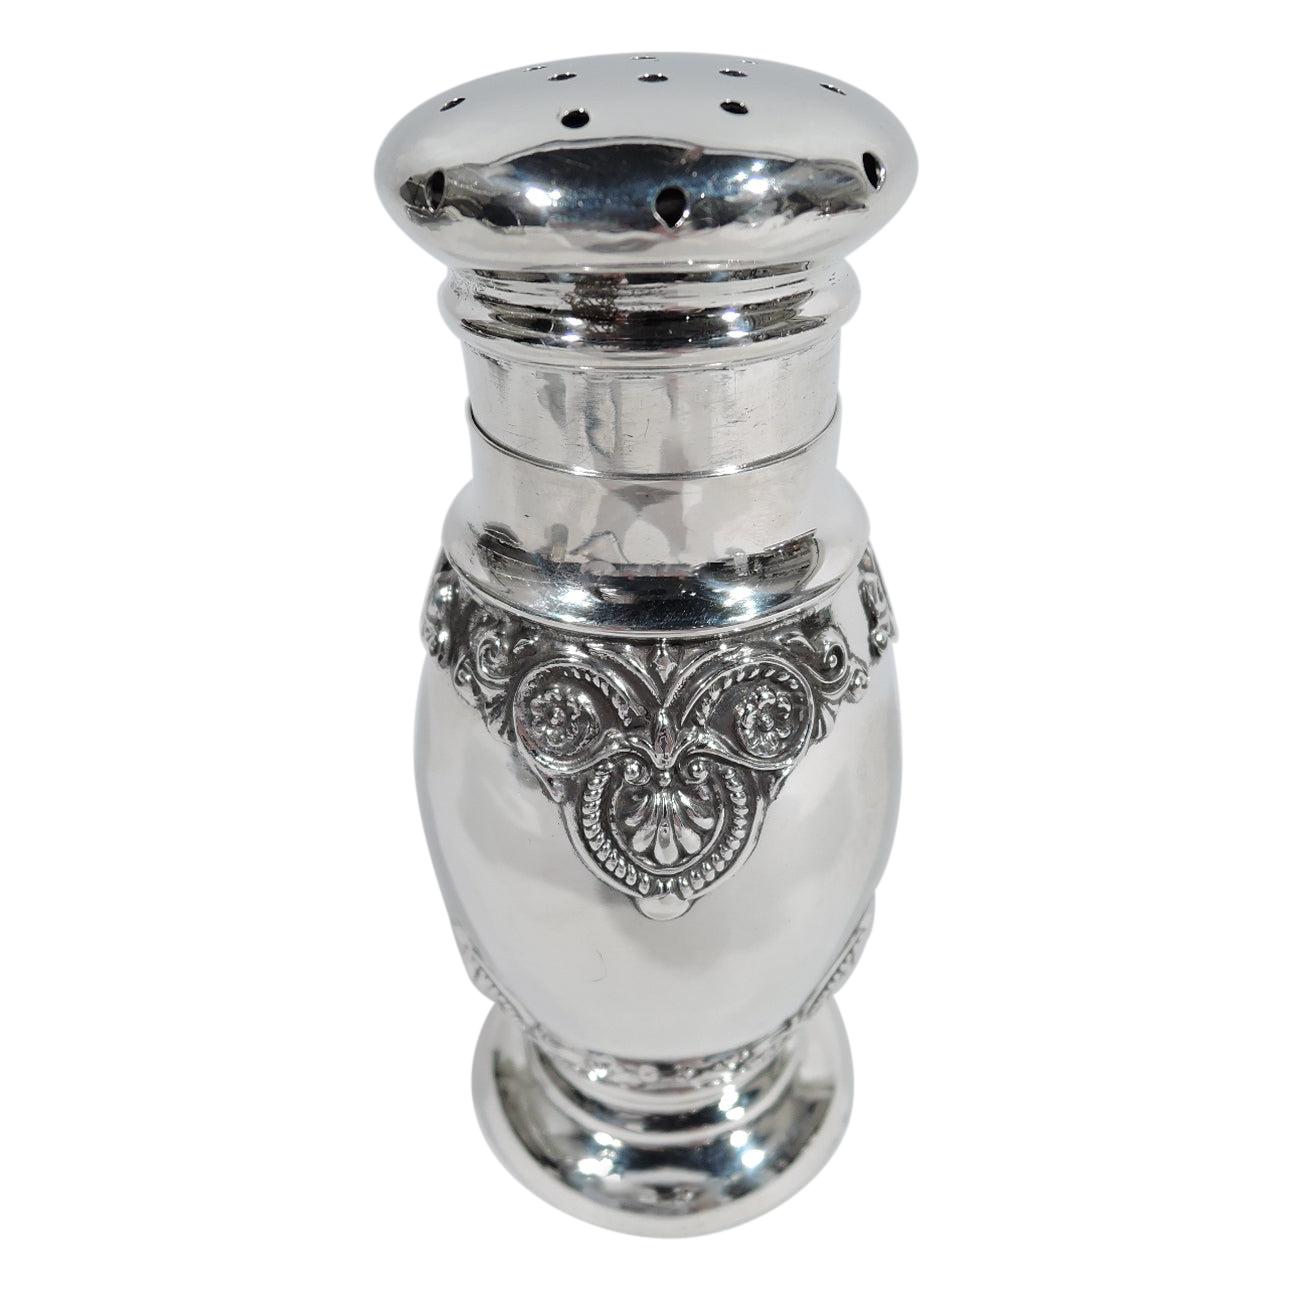 Antique American Edwardian Classical Sterling Silver Sugar Shaker